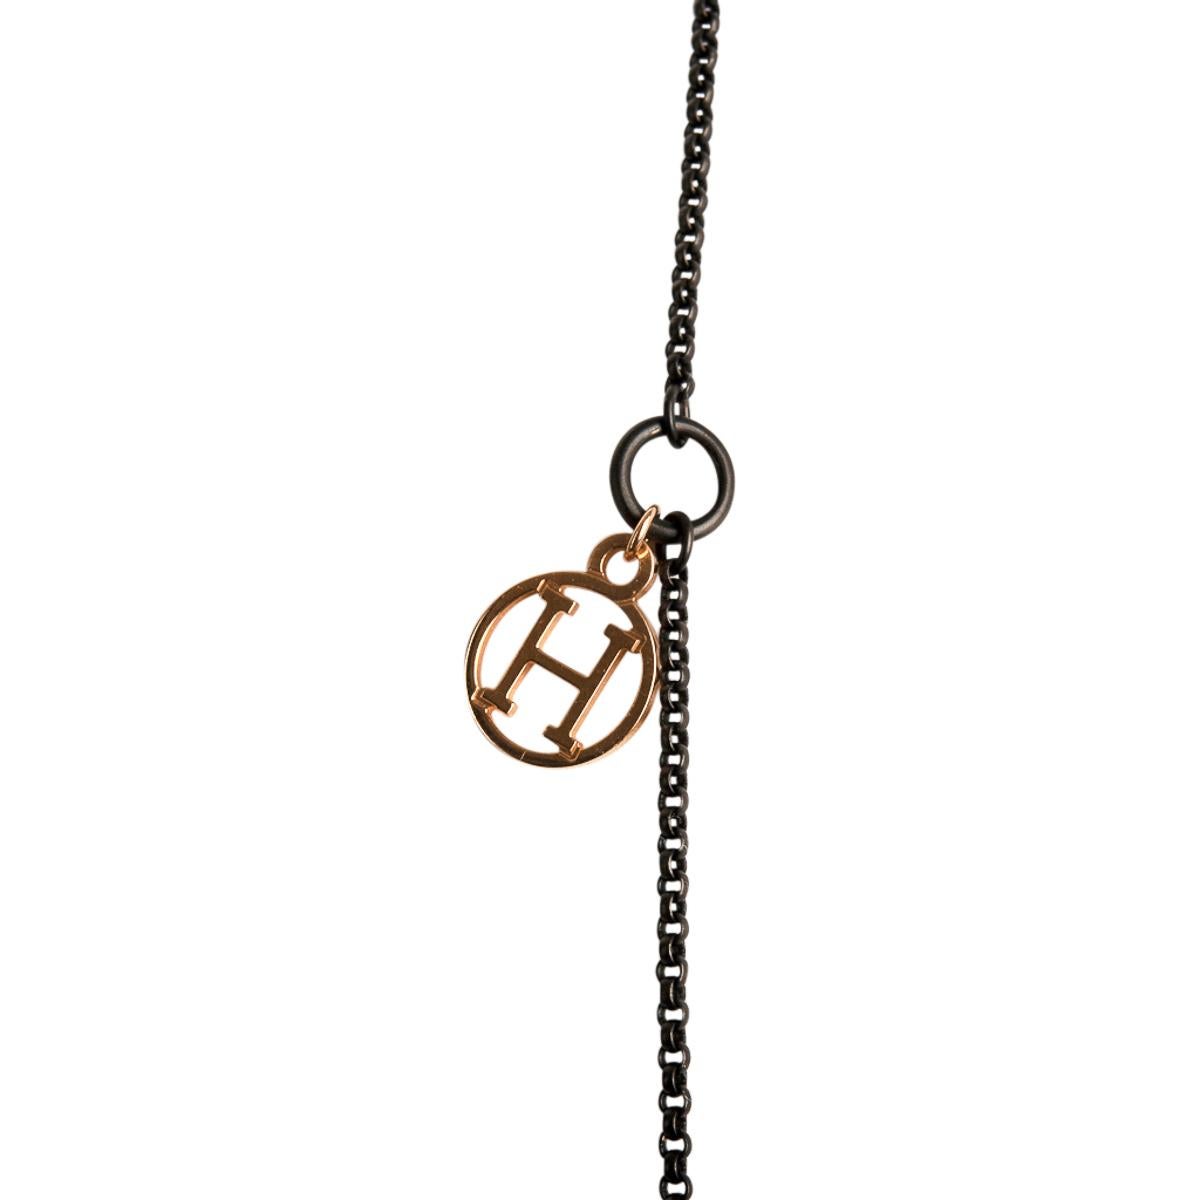 Hermes Crazy Caleche Necklace Blackened Silver 18K Rose Gold Limited Edition In Excellent Condition For Sale In Miami, FL